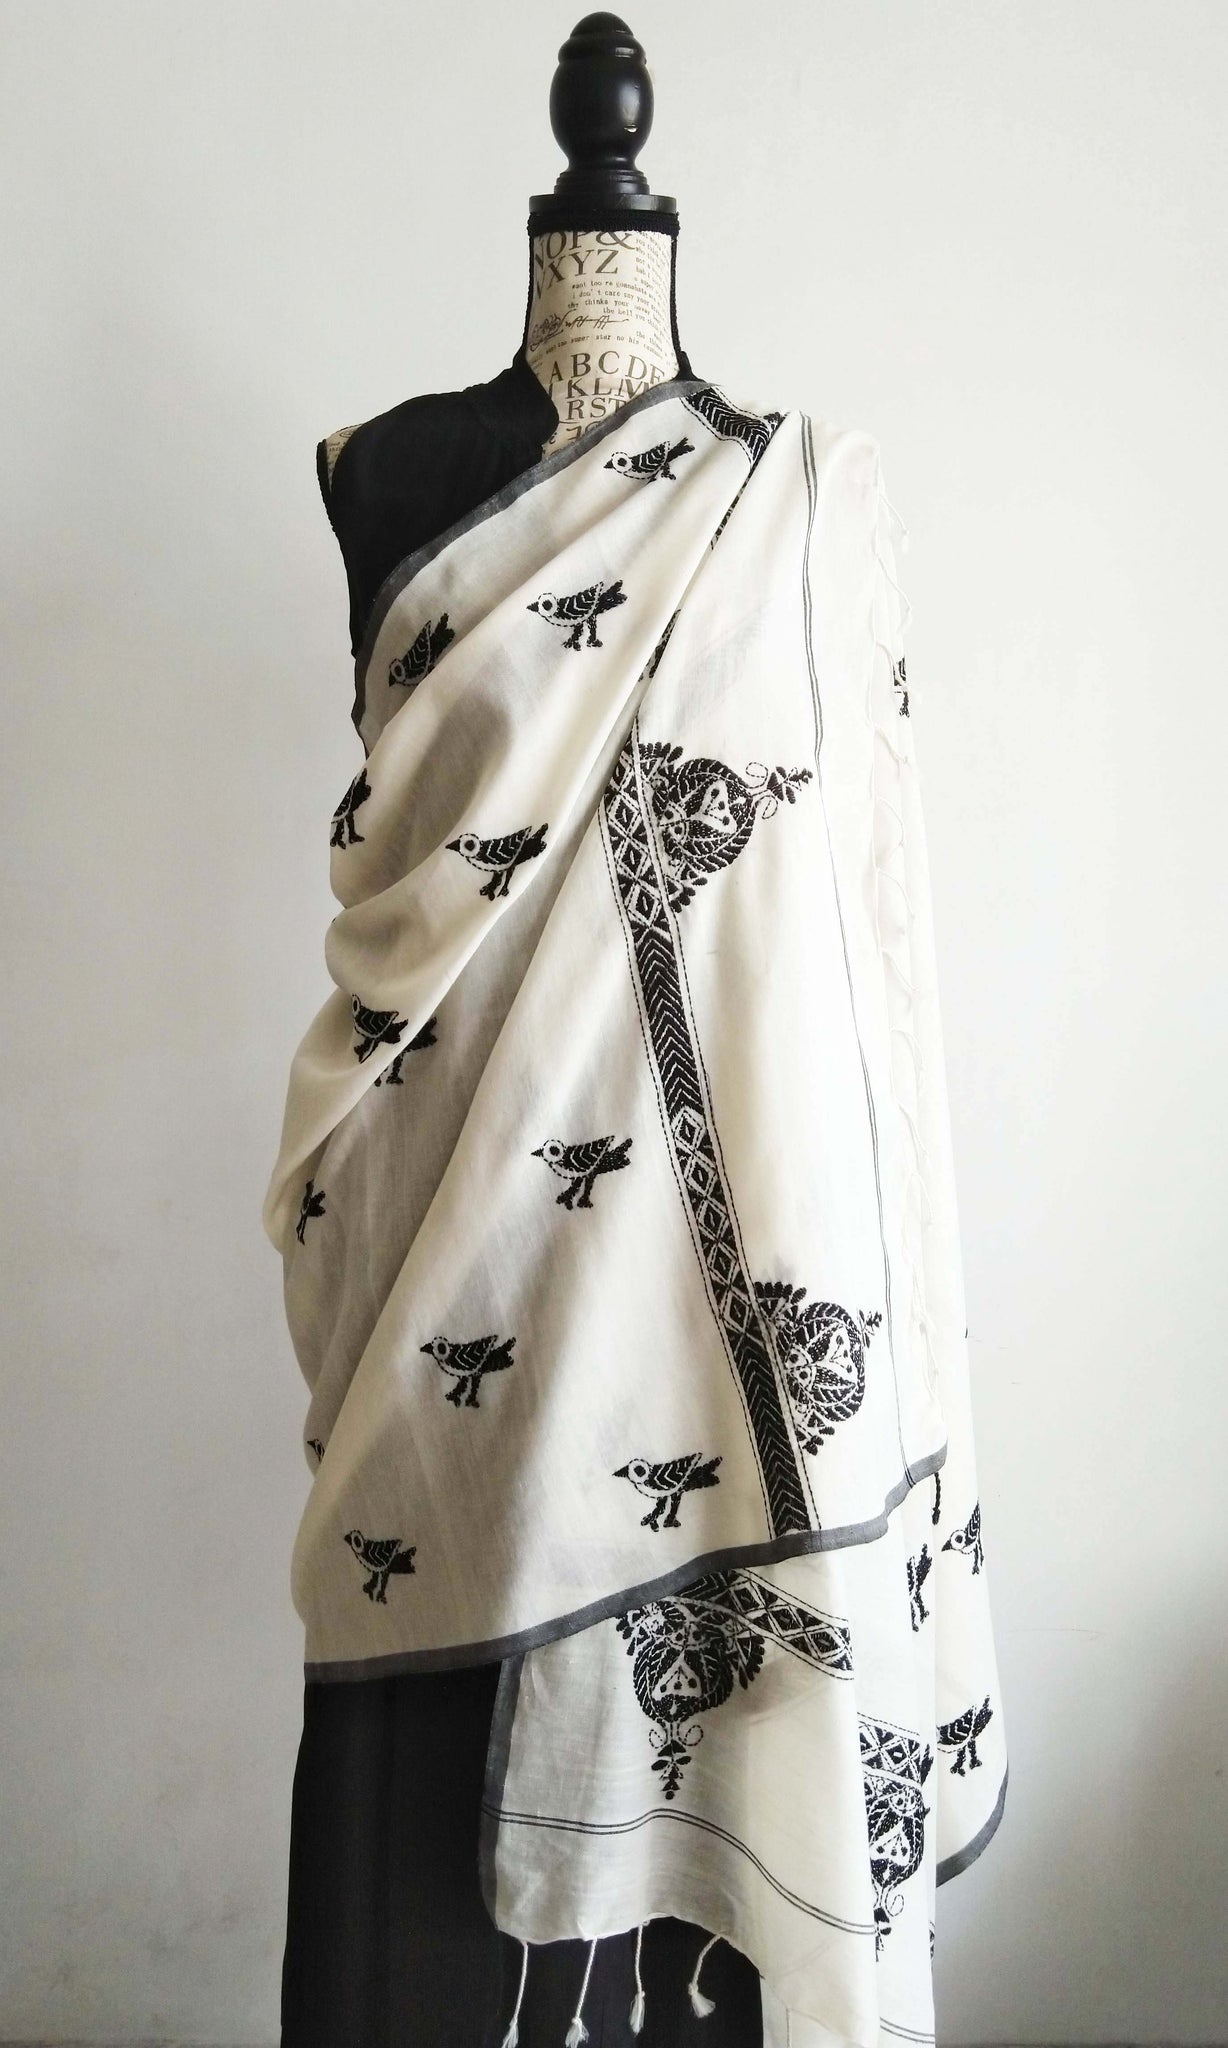 w90 Stole I Fine Kantha Hand Embroidery On Hand Woven Soft Cotton | Made To Order In 15 - 20 Working Days